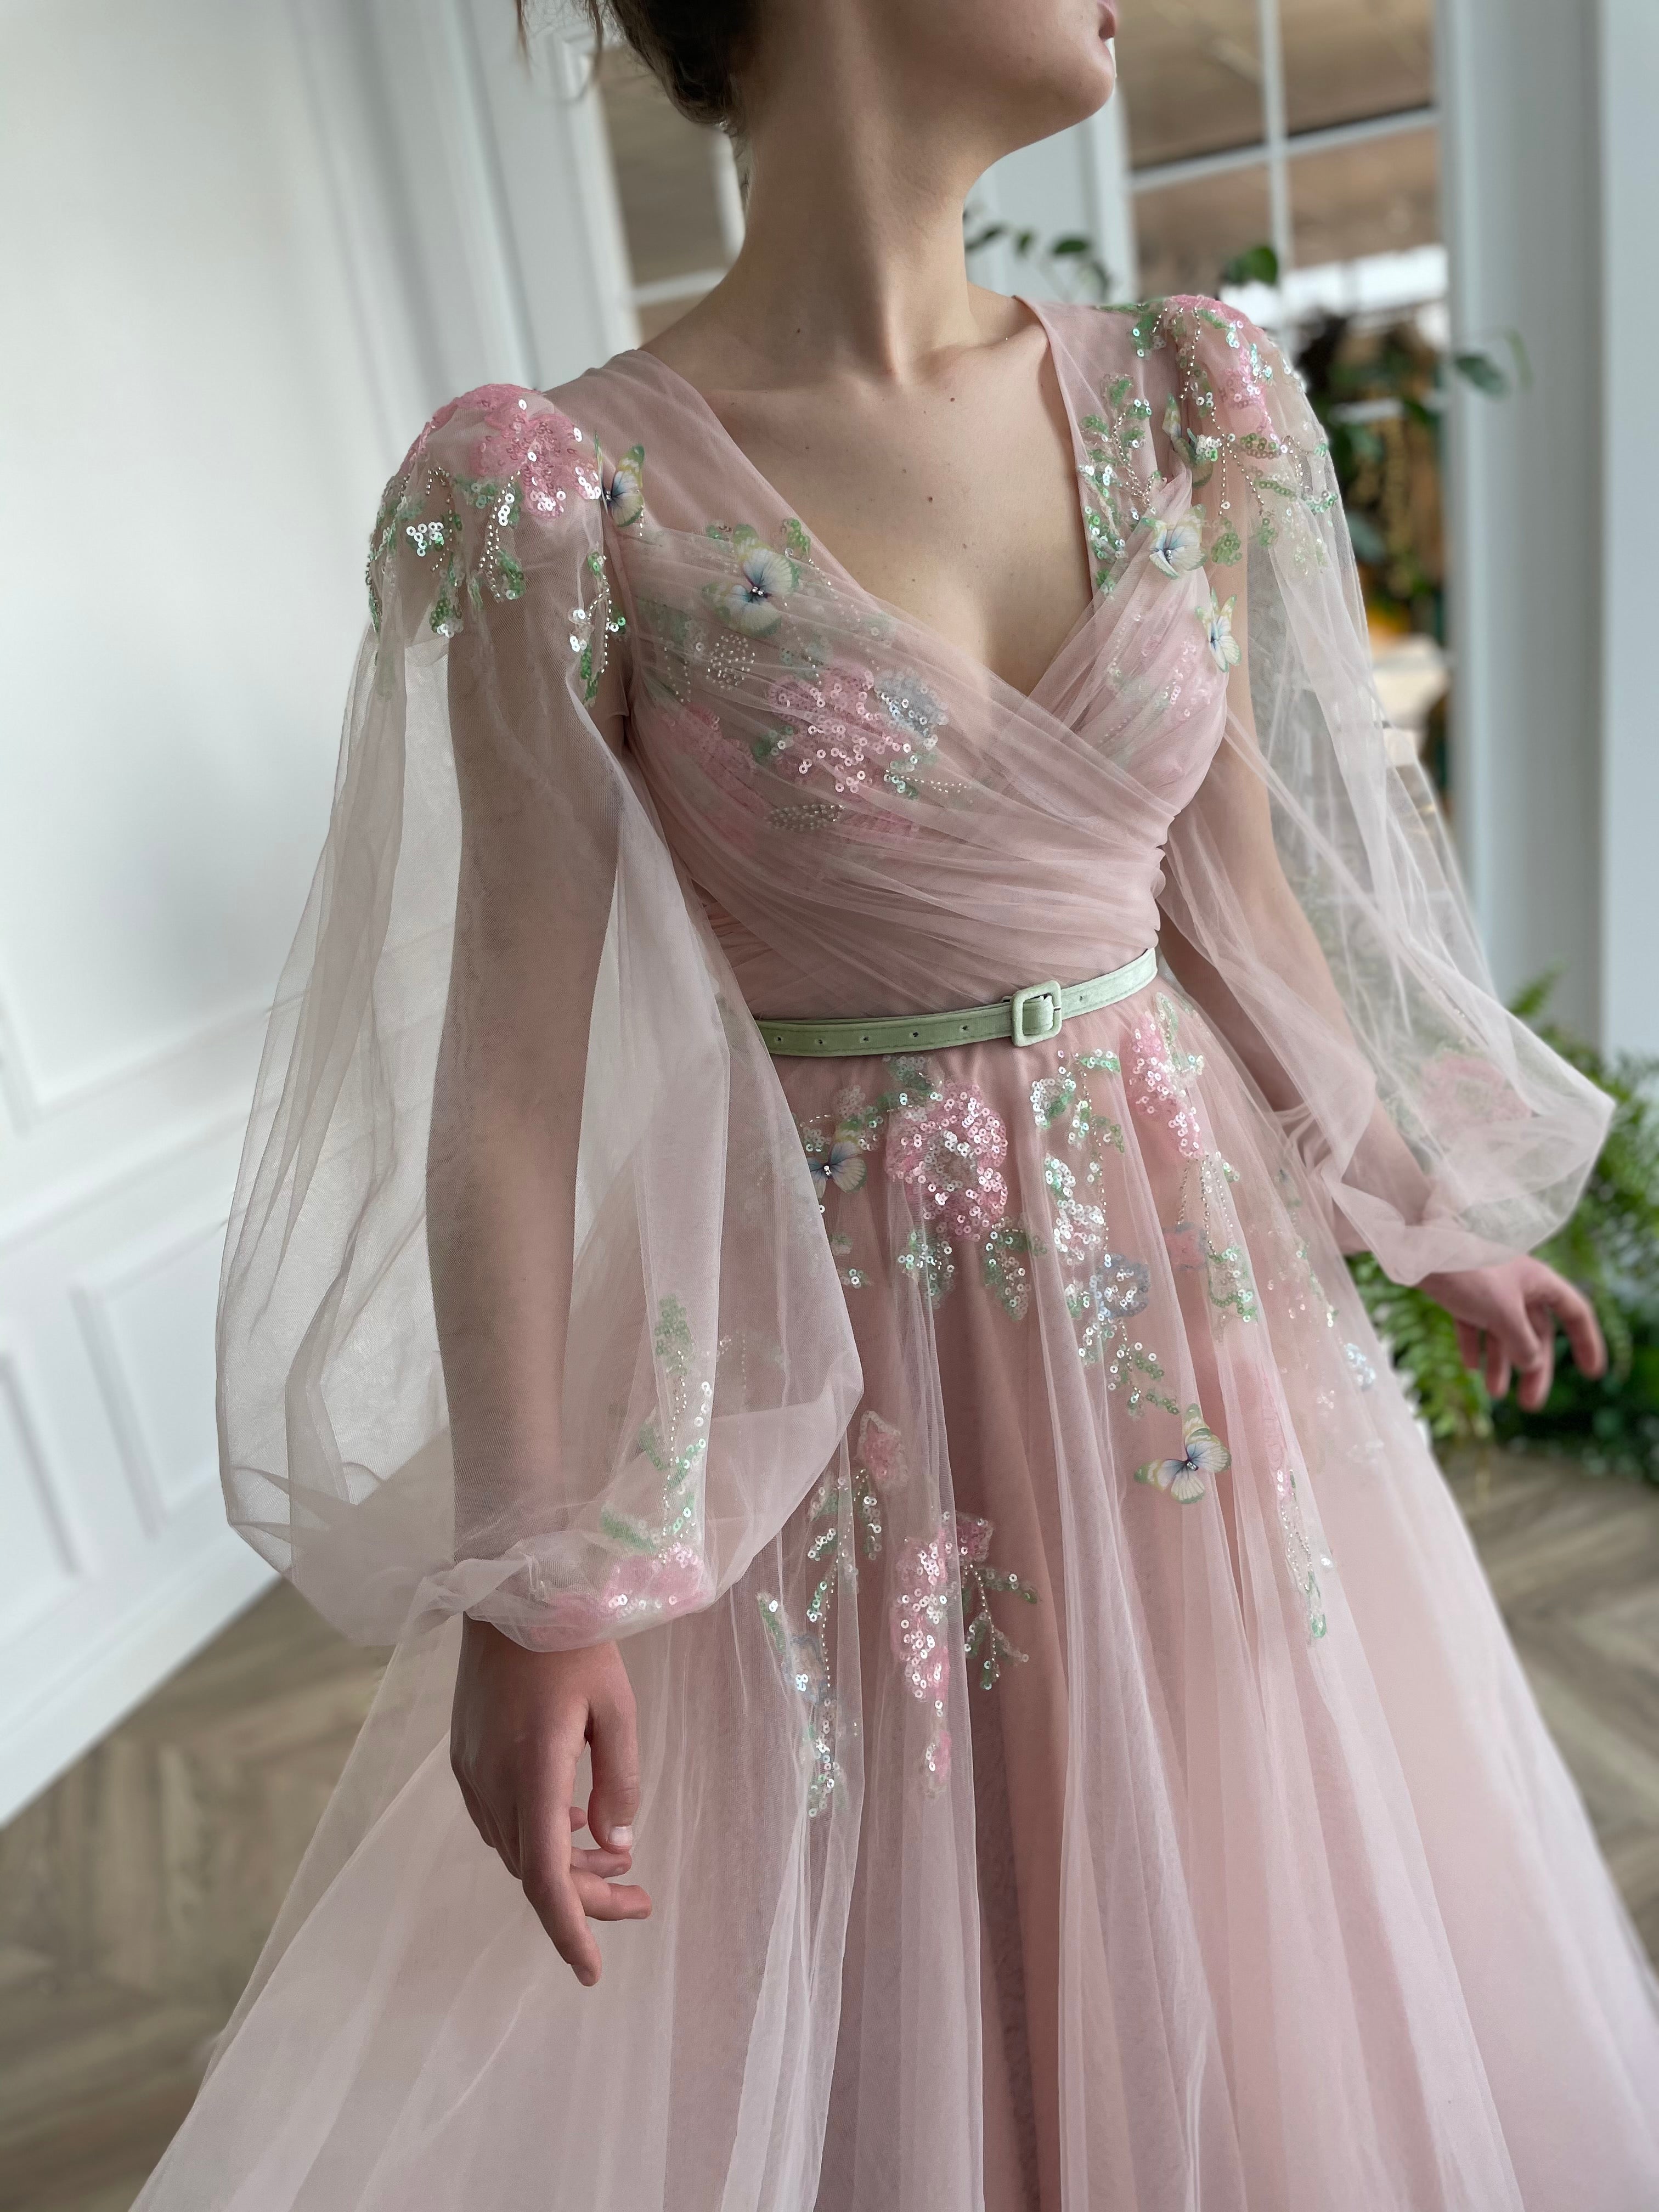 Pink A-Line dress with long sleeves and embroidery